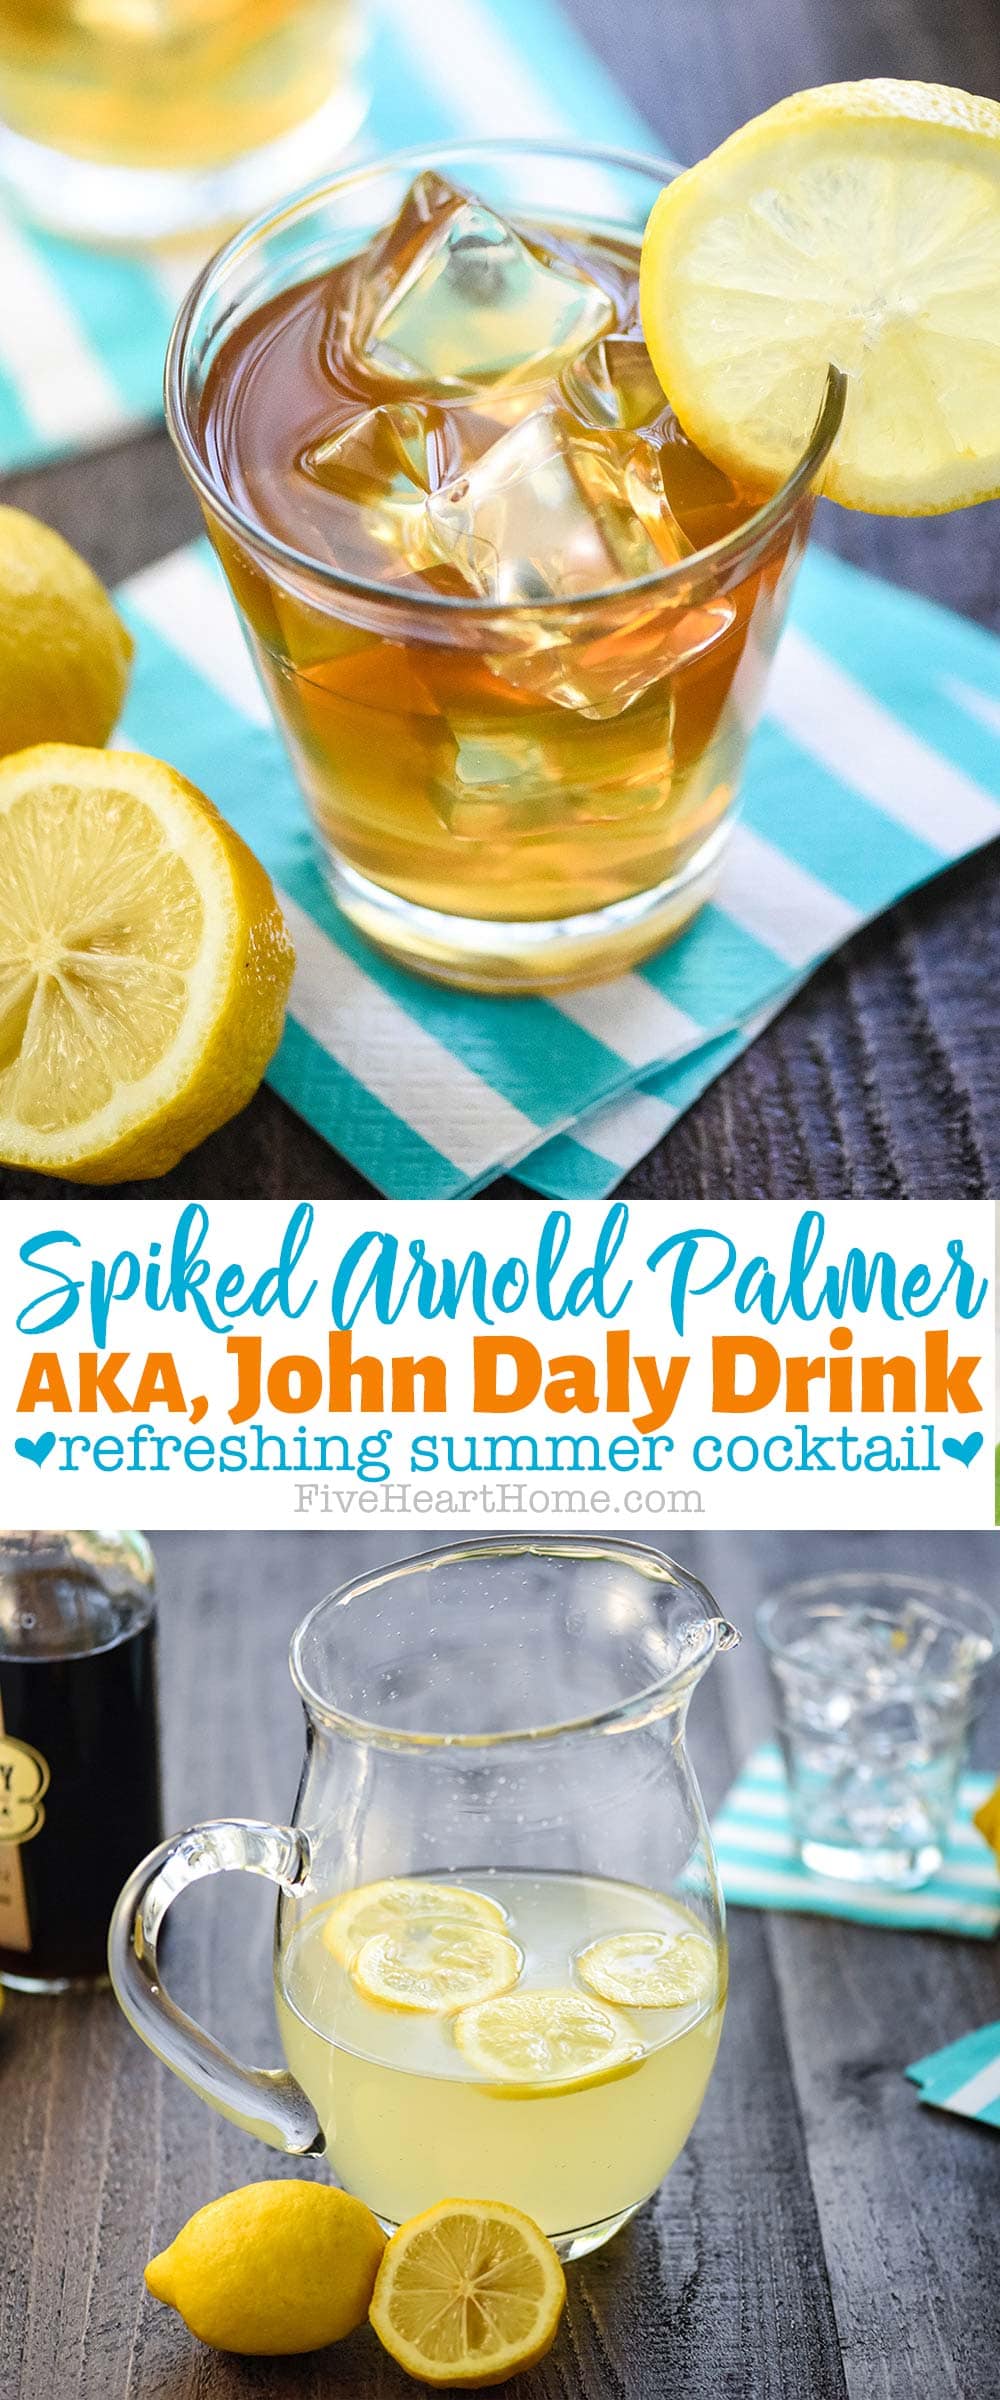 John Daly Drink ~ this alcohol version of the classic Arnold Palmer drink combines fresh lemonade and sweet tea vodka for a refreshing summer cocktail! | FiveHeartHome.com via @fivehearthome